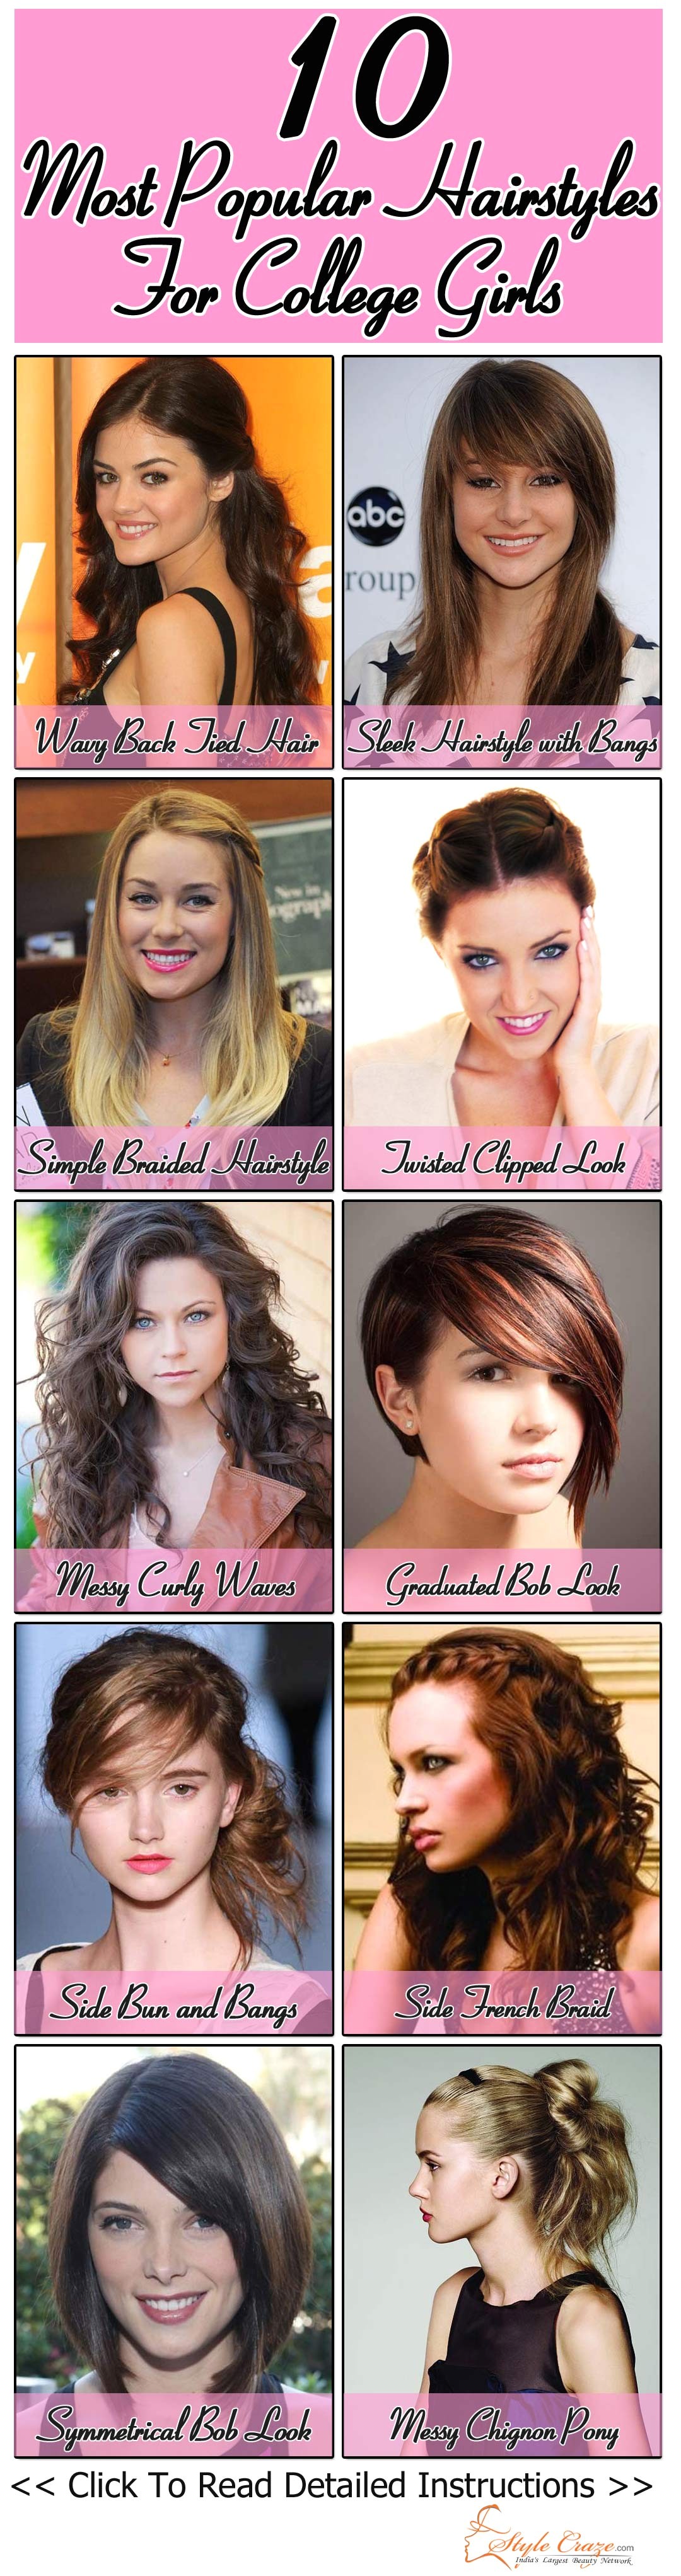 10 Most Popular Hairstyles For College Girls